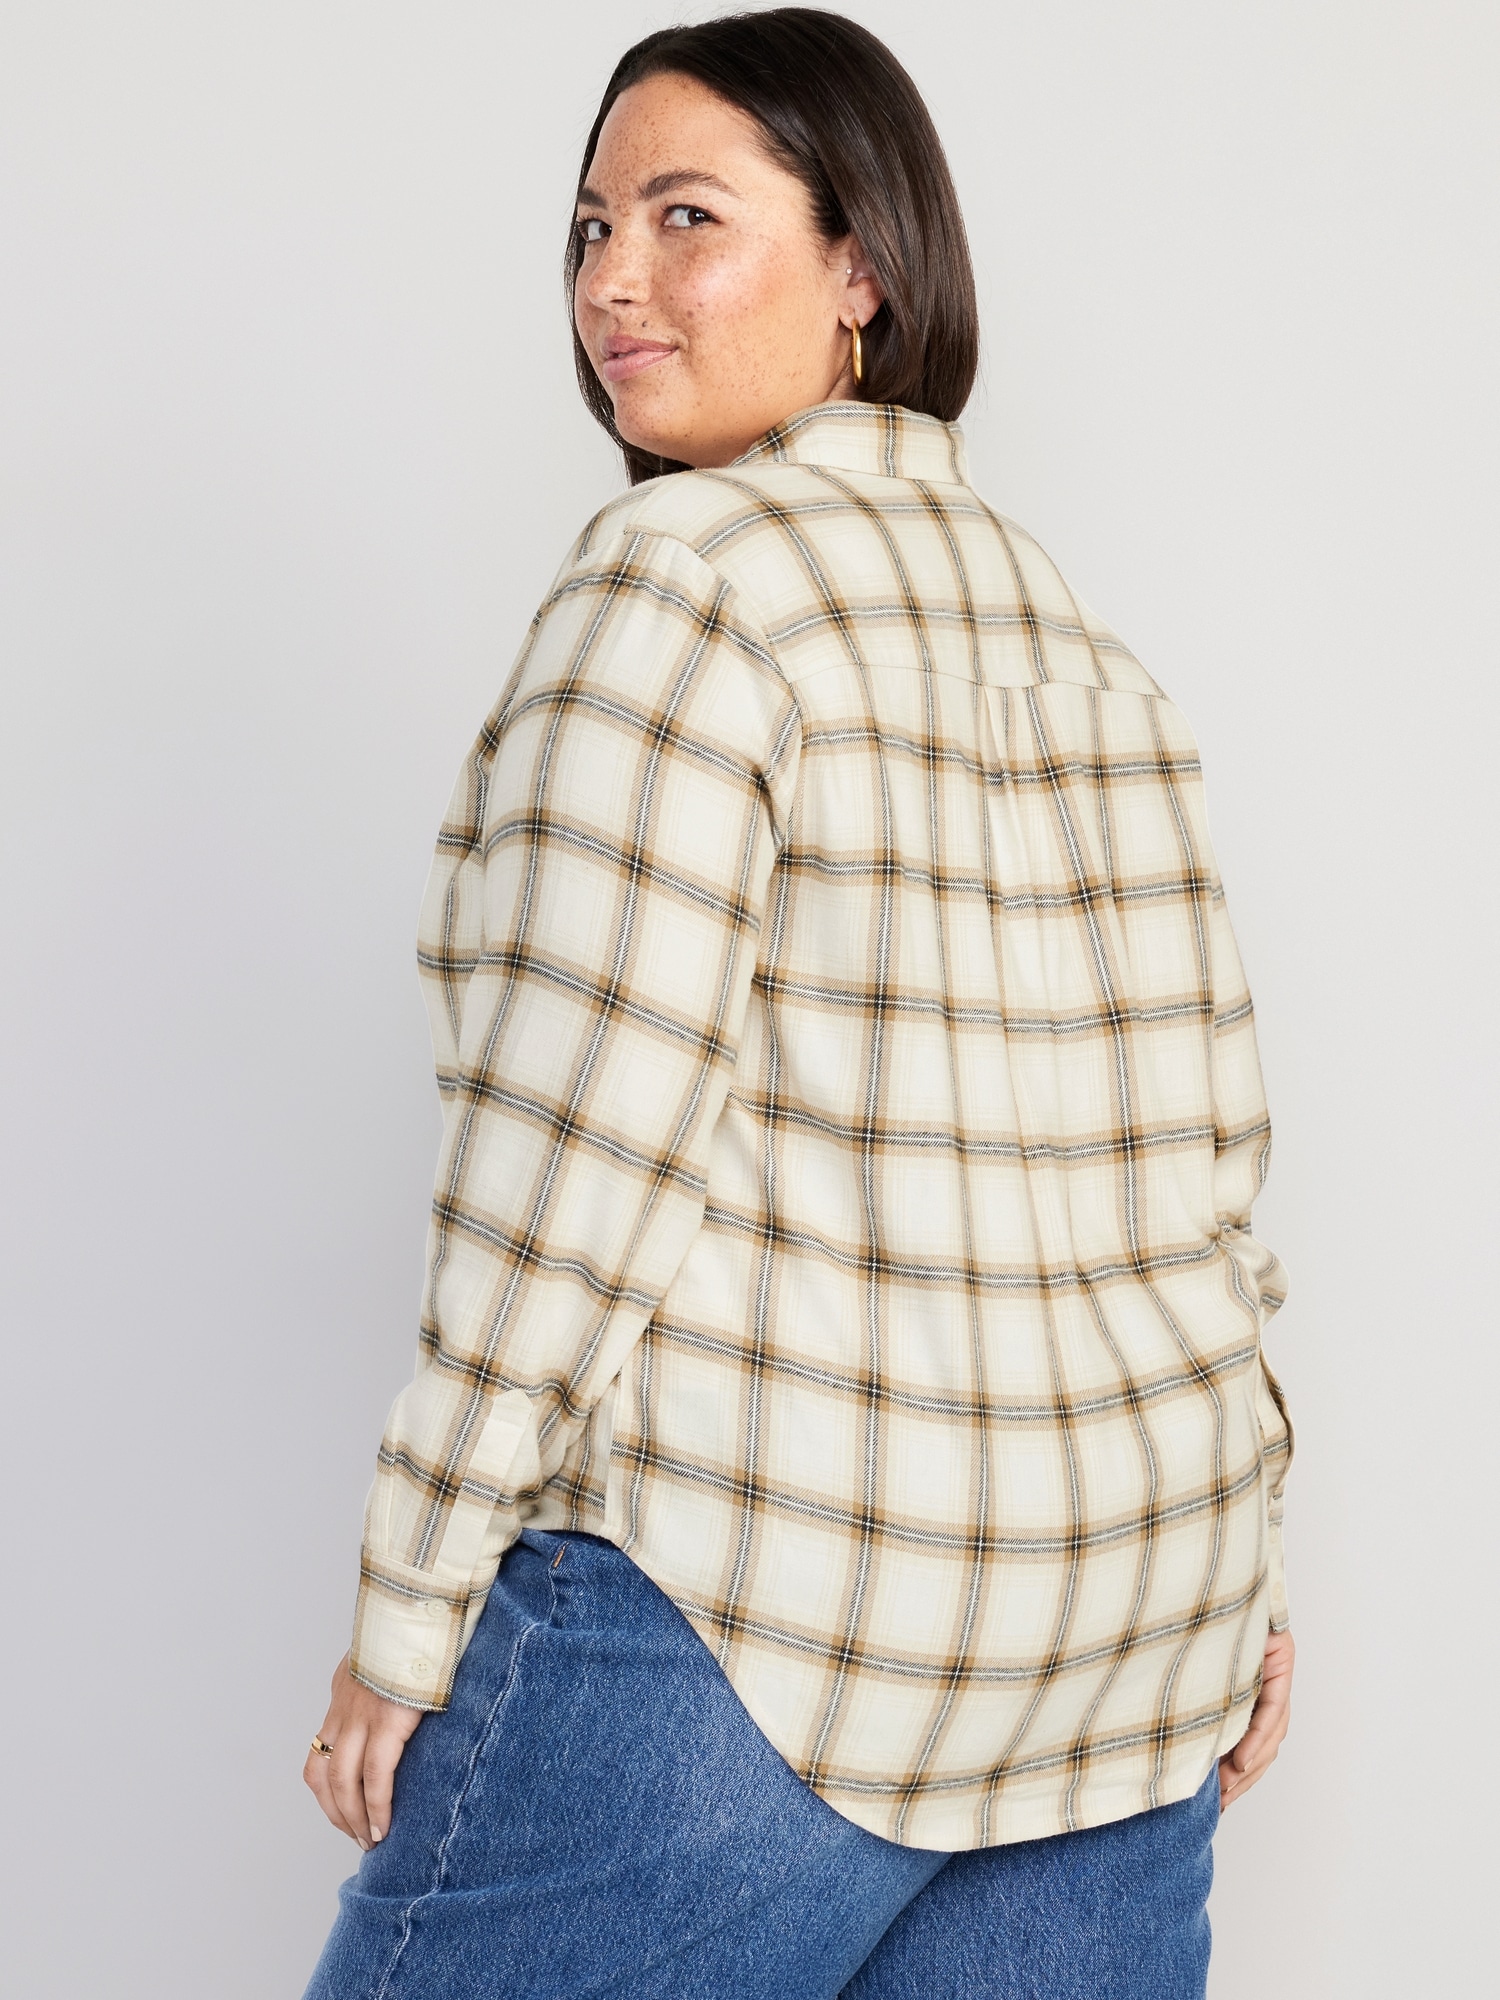 White Long Sleeve Shirts for Women 5 Dollar Items Flannel Shirts